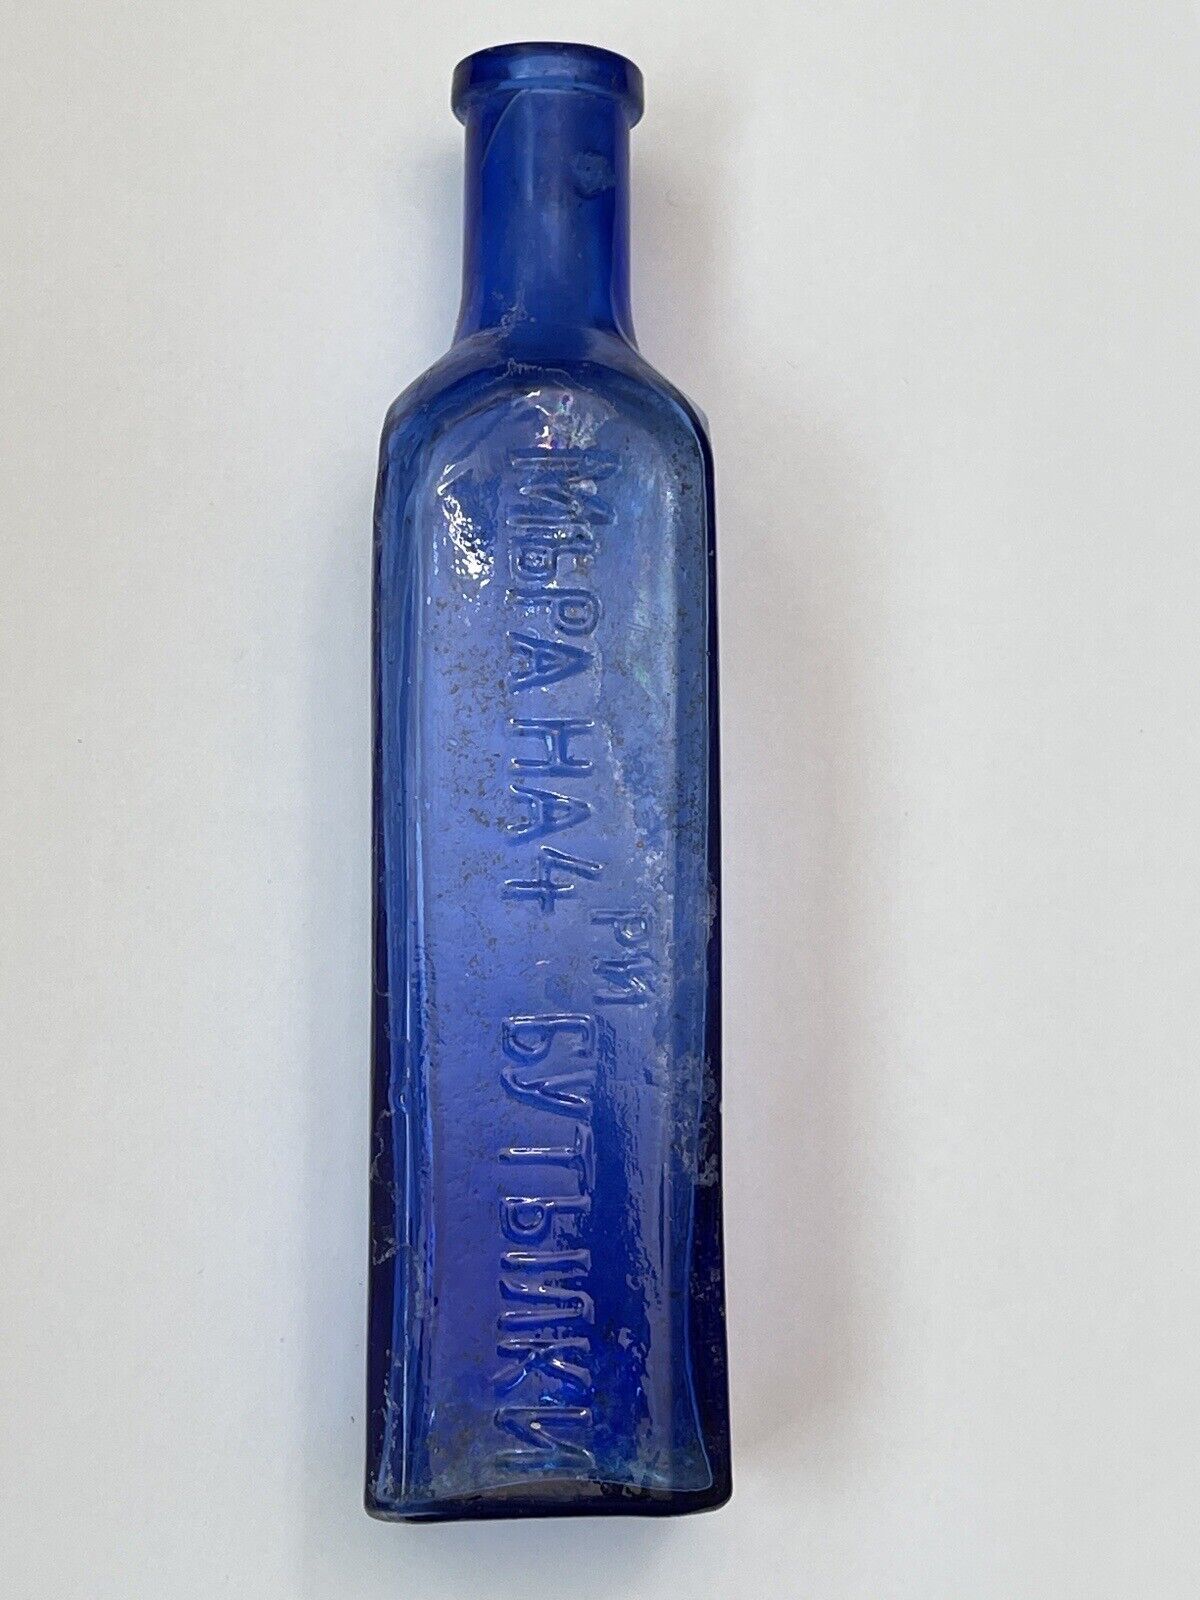 Antique measuring bottle from the 1800s.